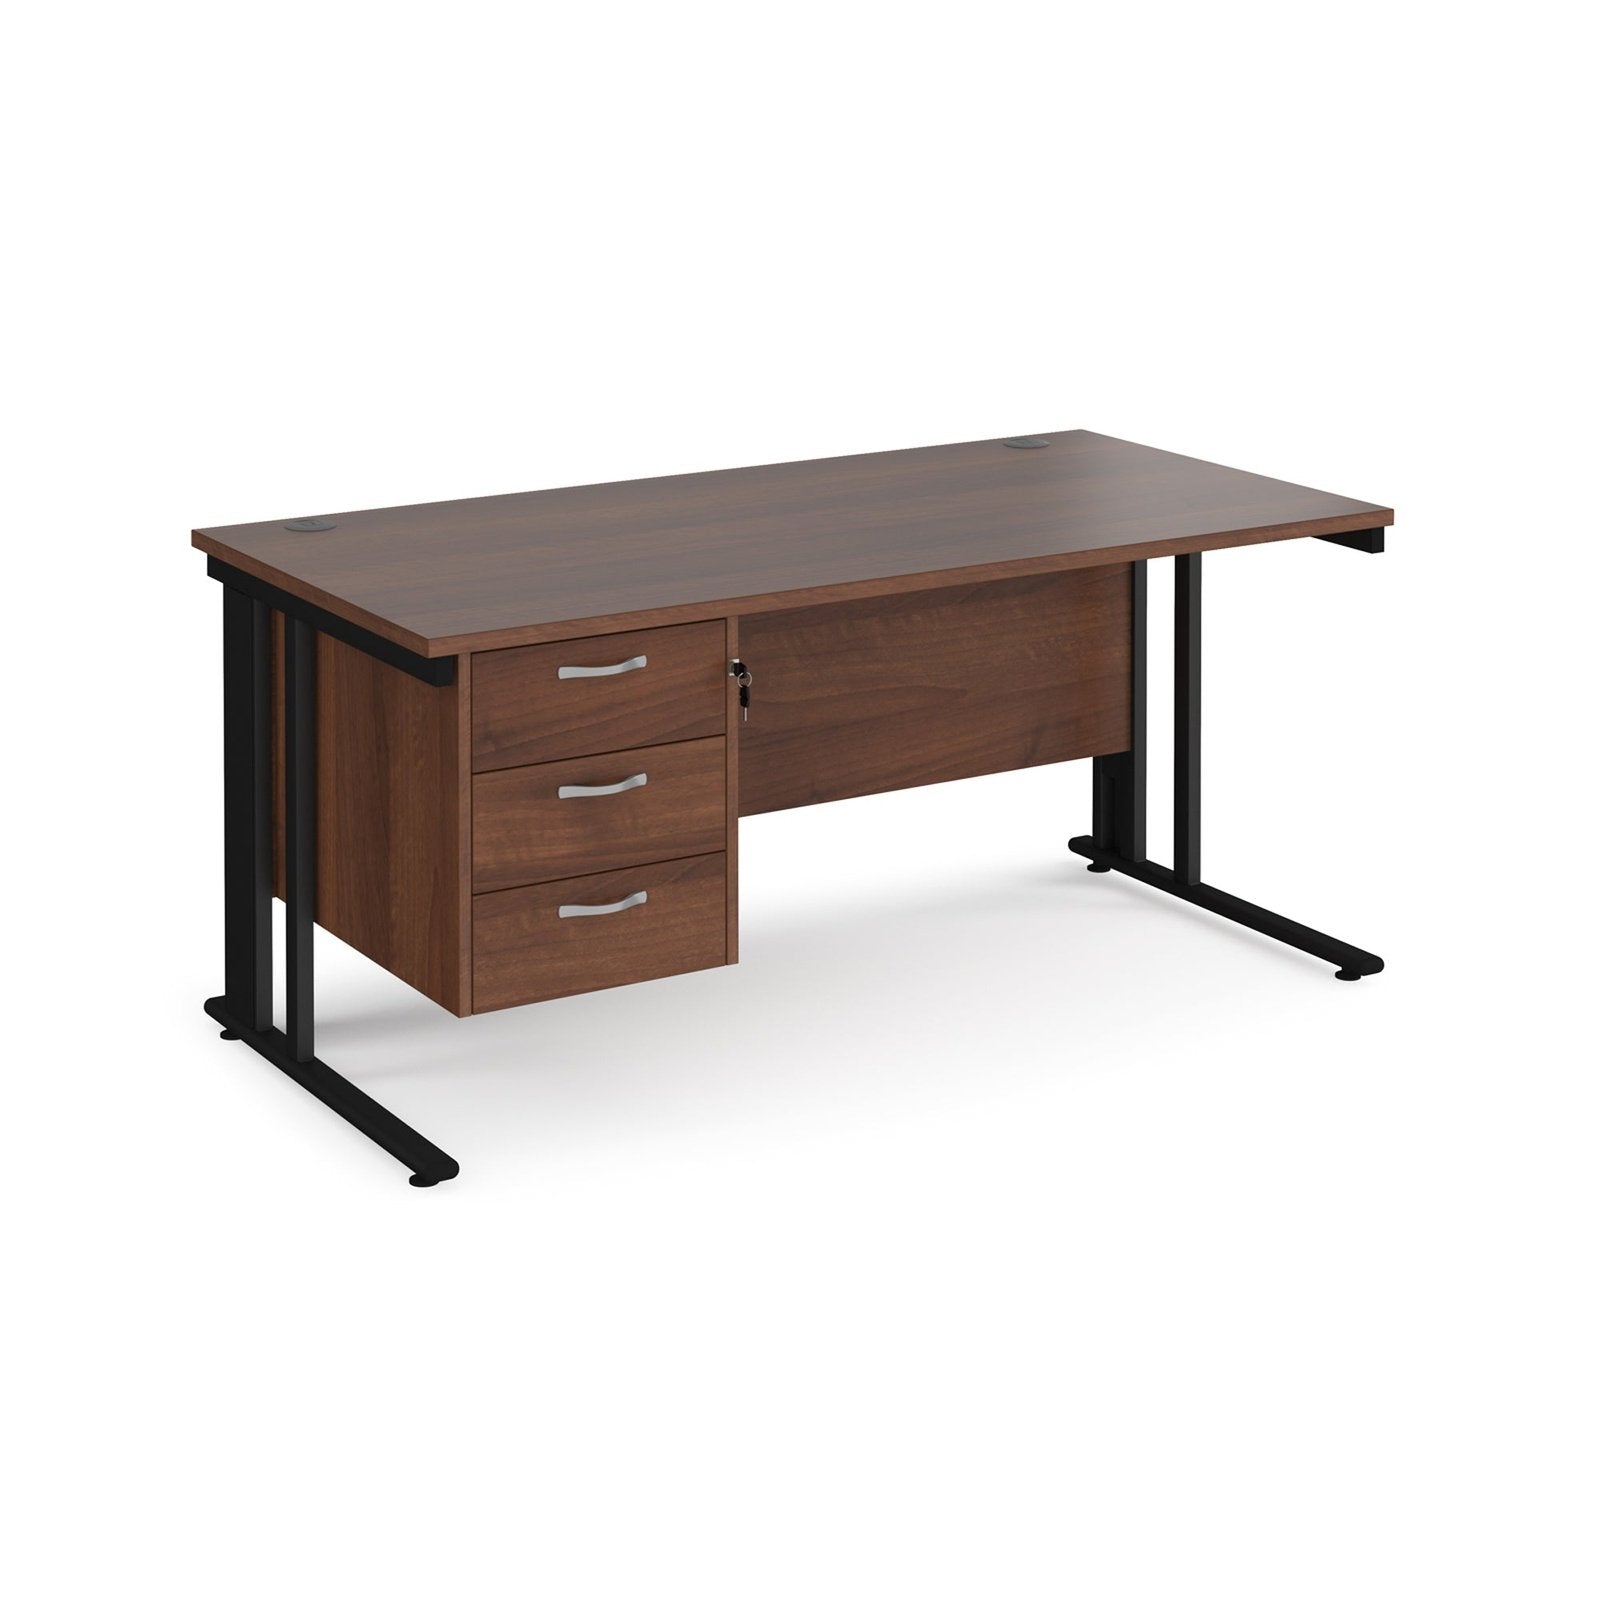 Maestro 25 cable managed leg straight desk 800 deep with 3 drawer pedestal - Office Products Online